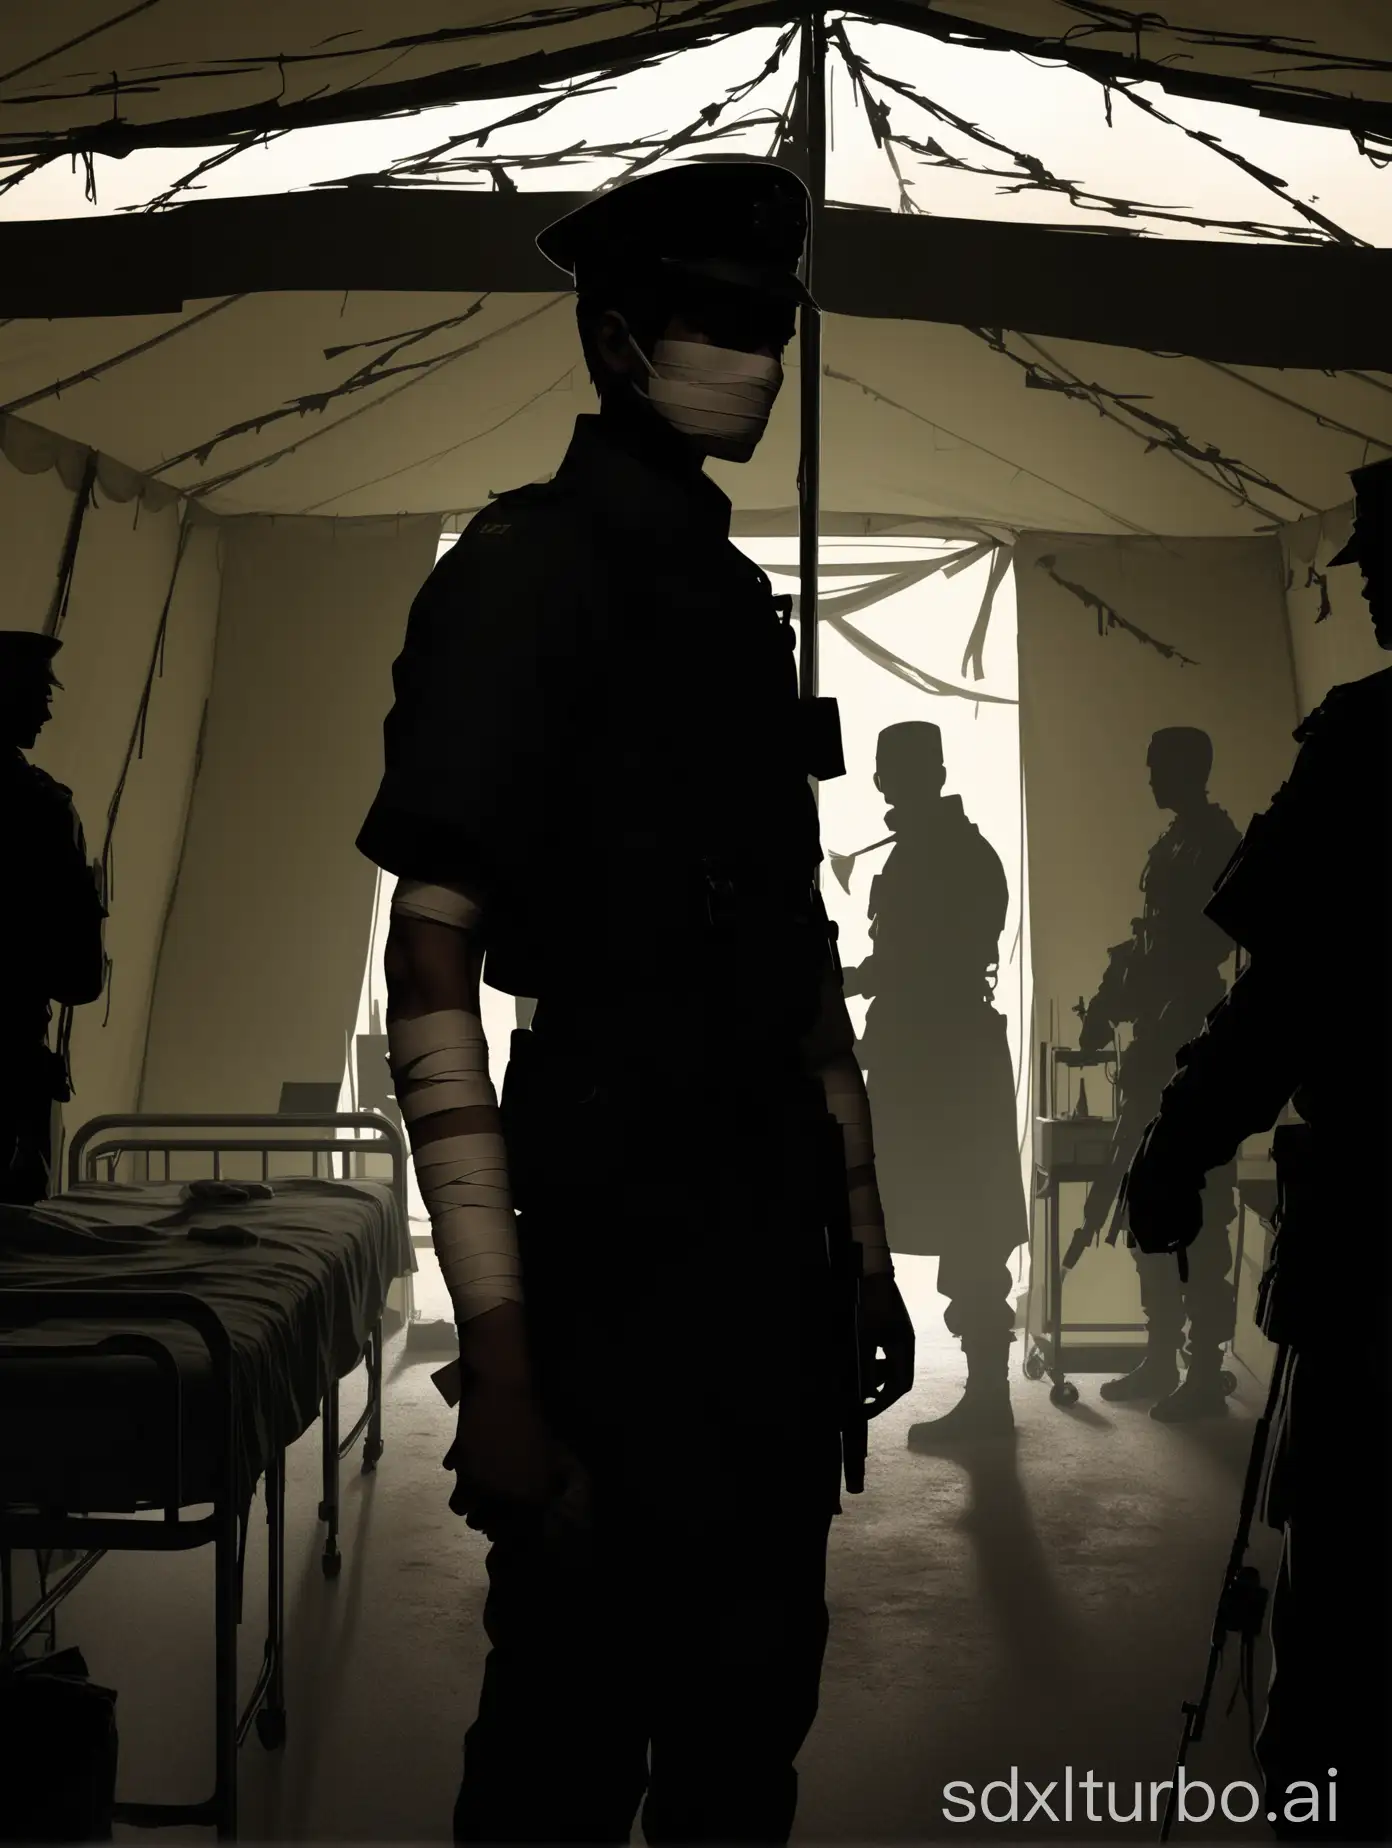 Silhouette of a young man with bandages on his right arm and part of his face, wearing a uniform of a guard in a post-apocalyptic medical tent. He stands at attention near the entrance of a makeshift infirmary, with medical staff working in the background.